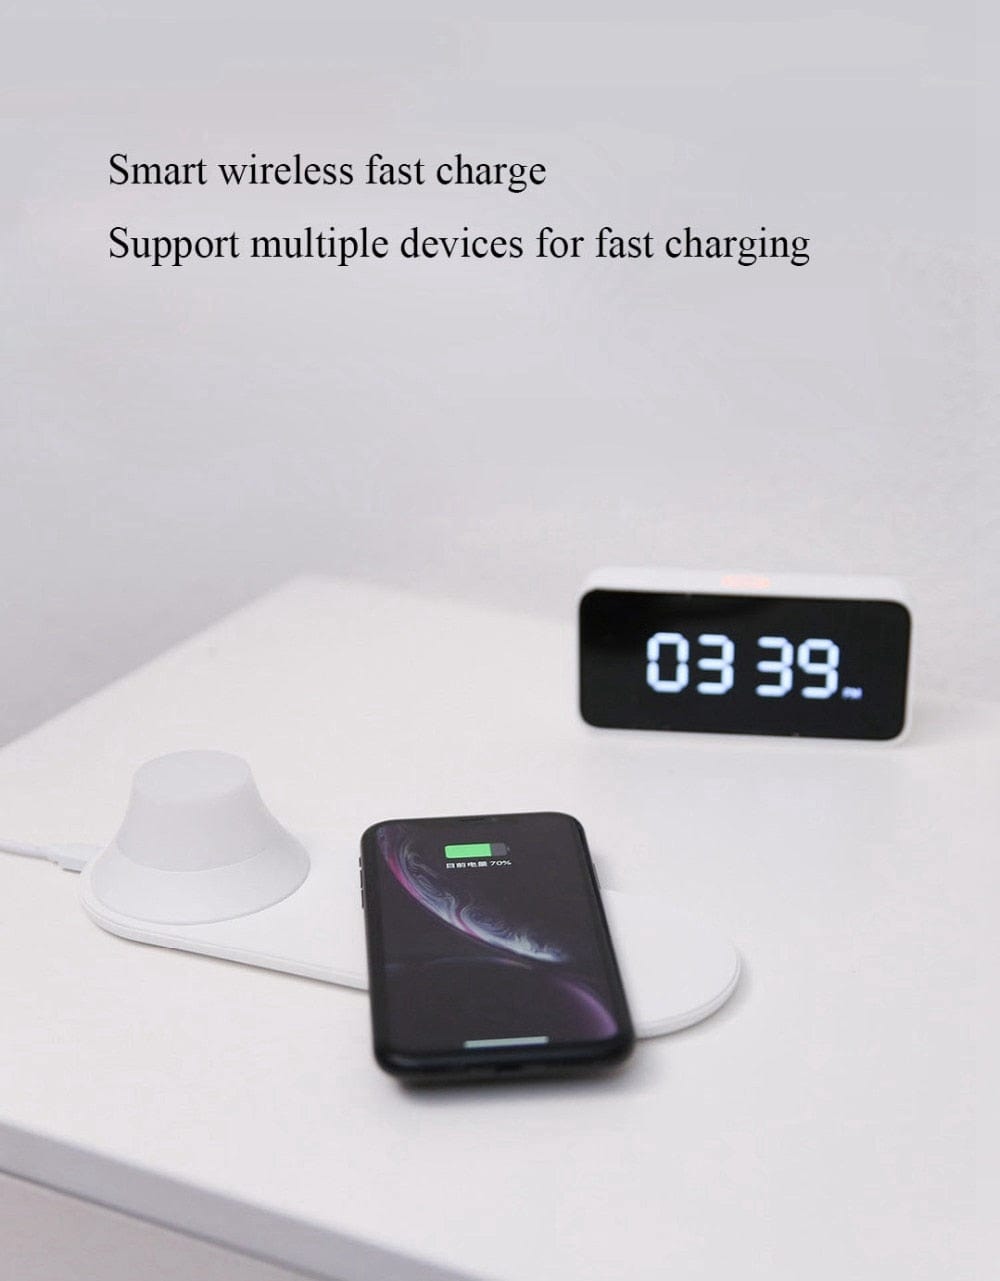 LED Night Light With Wireless Magnetic Charger Attraction Fast Charging For Phones - Smart Tech Shopping